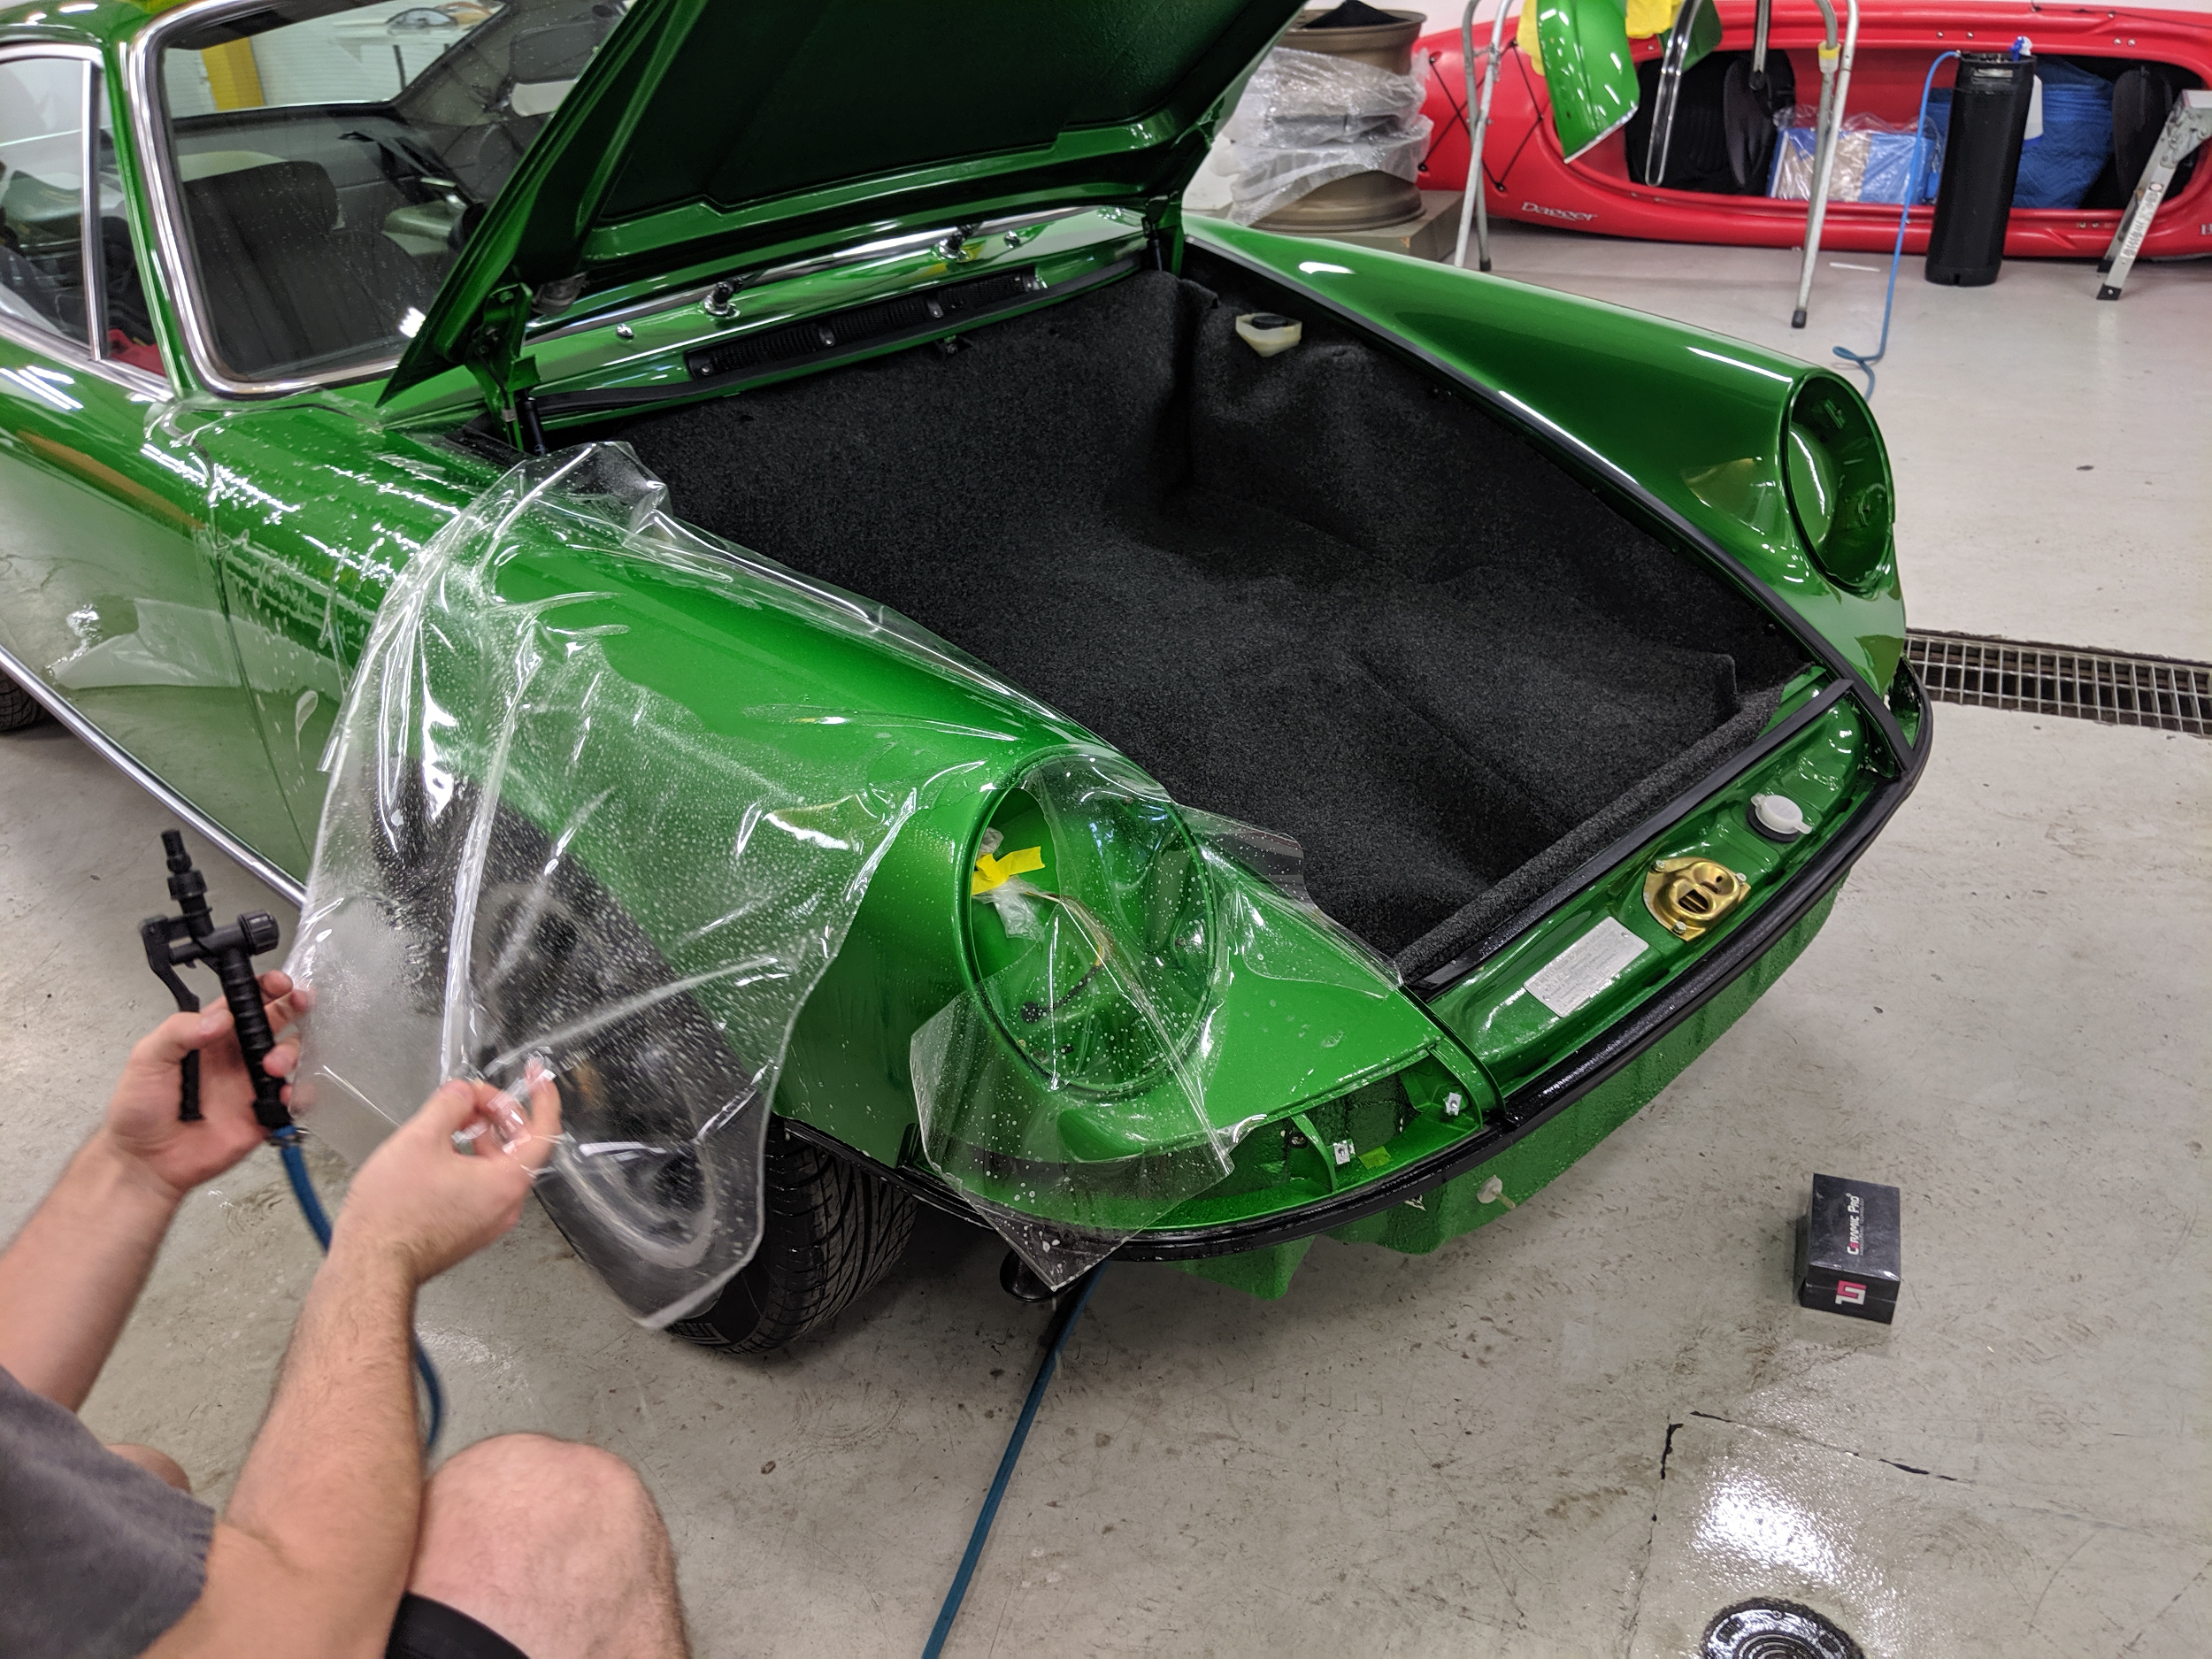 Paint Protection Film Installation